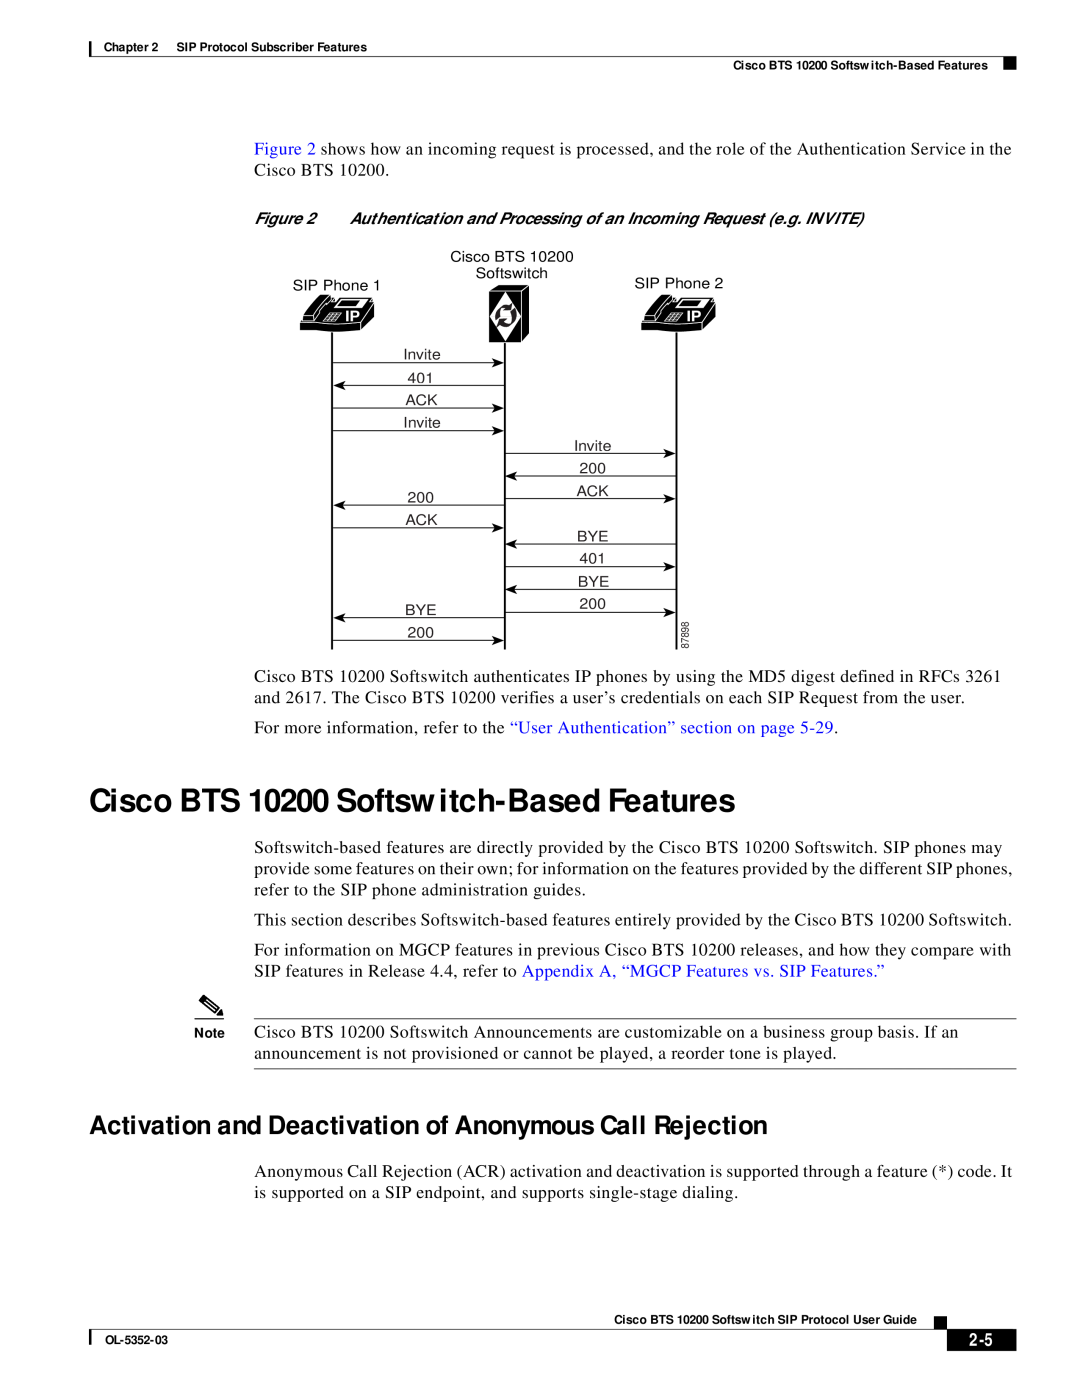 Cisco Systems manual Cisco BTS 10200 Softswitch-Based Features, Activation and Deactivation of Anonymous Call Rejection 